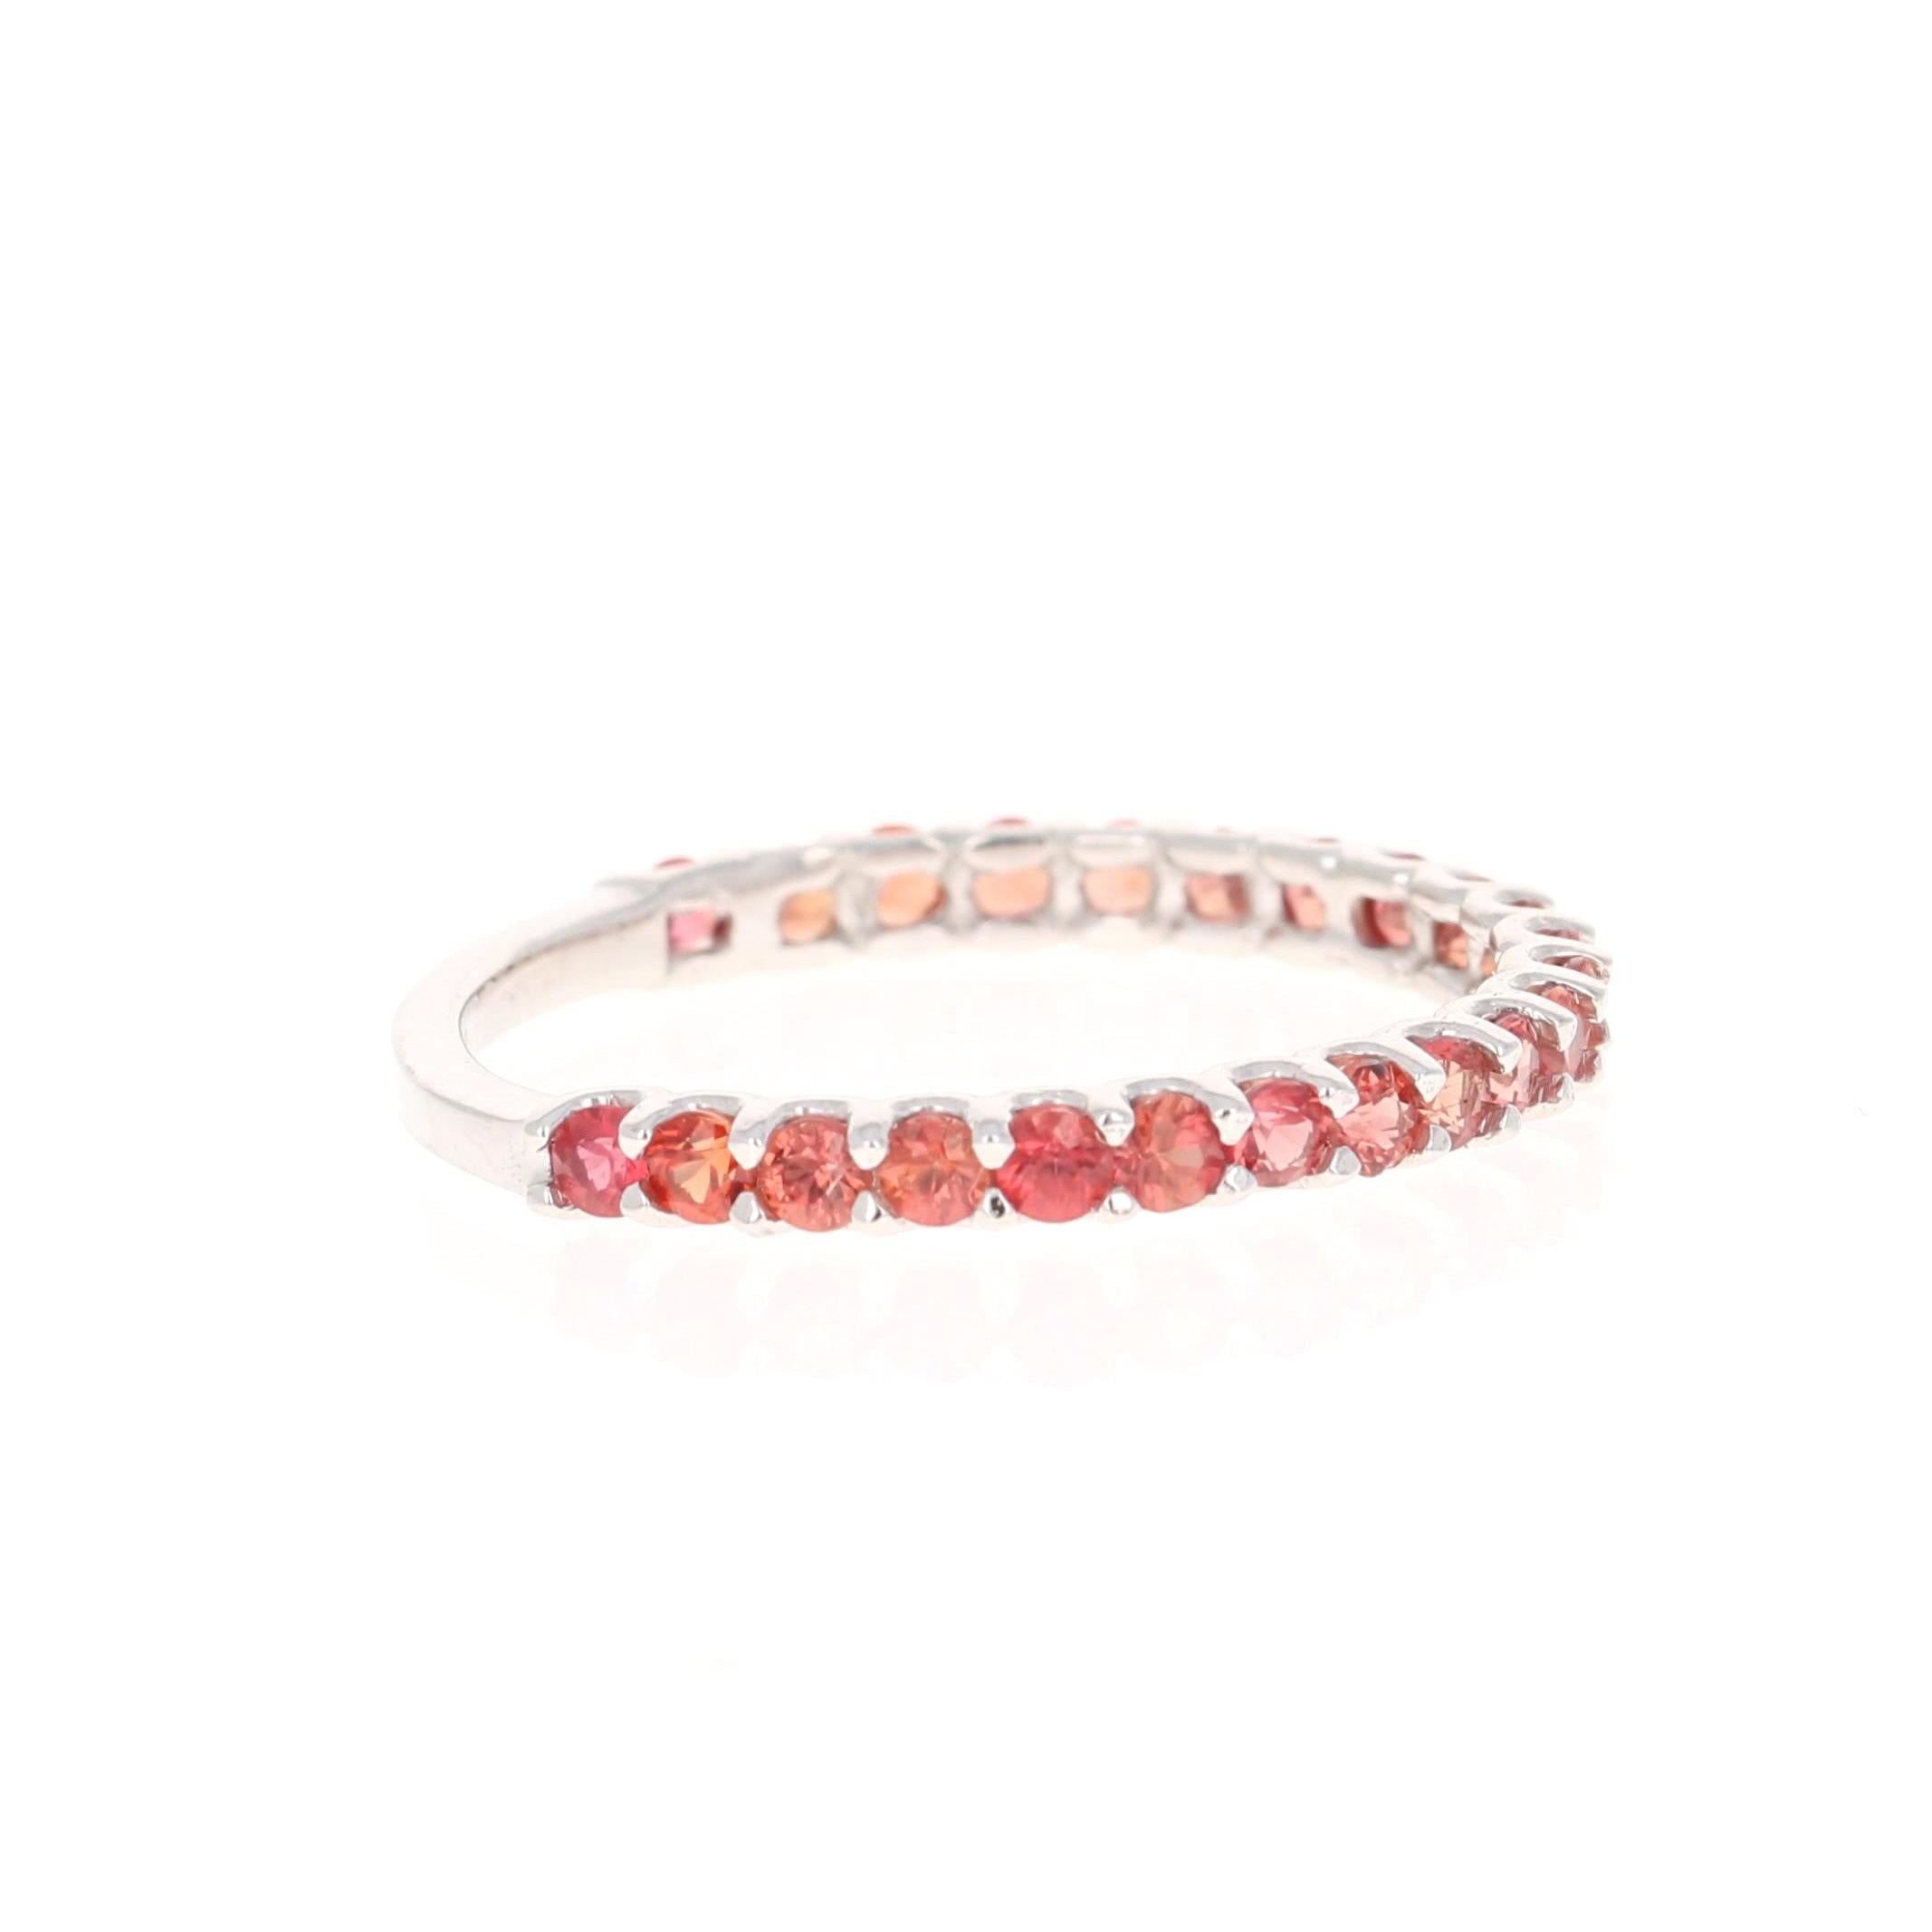 This ring has 23 Natural Round Cut Red Sapphires that weigh 0.85 Carats. 

Crafted in 14 Karat Rose Gold and weighs approximately 1.3 grams 

The ring is a size 7 and can be re-sized at no additional charge!

We have the same band in Rose Gold.